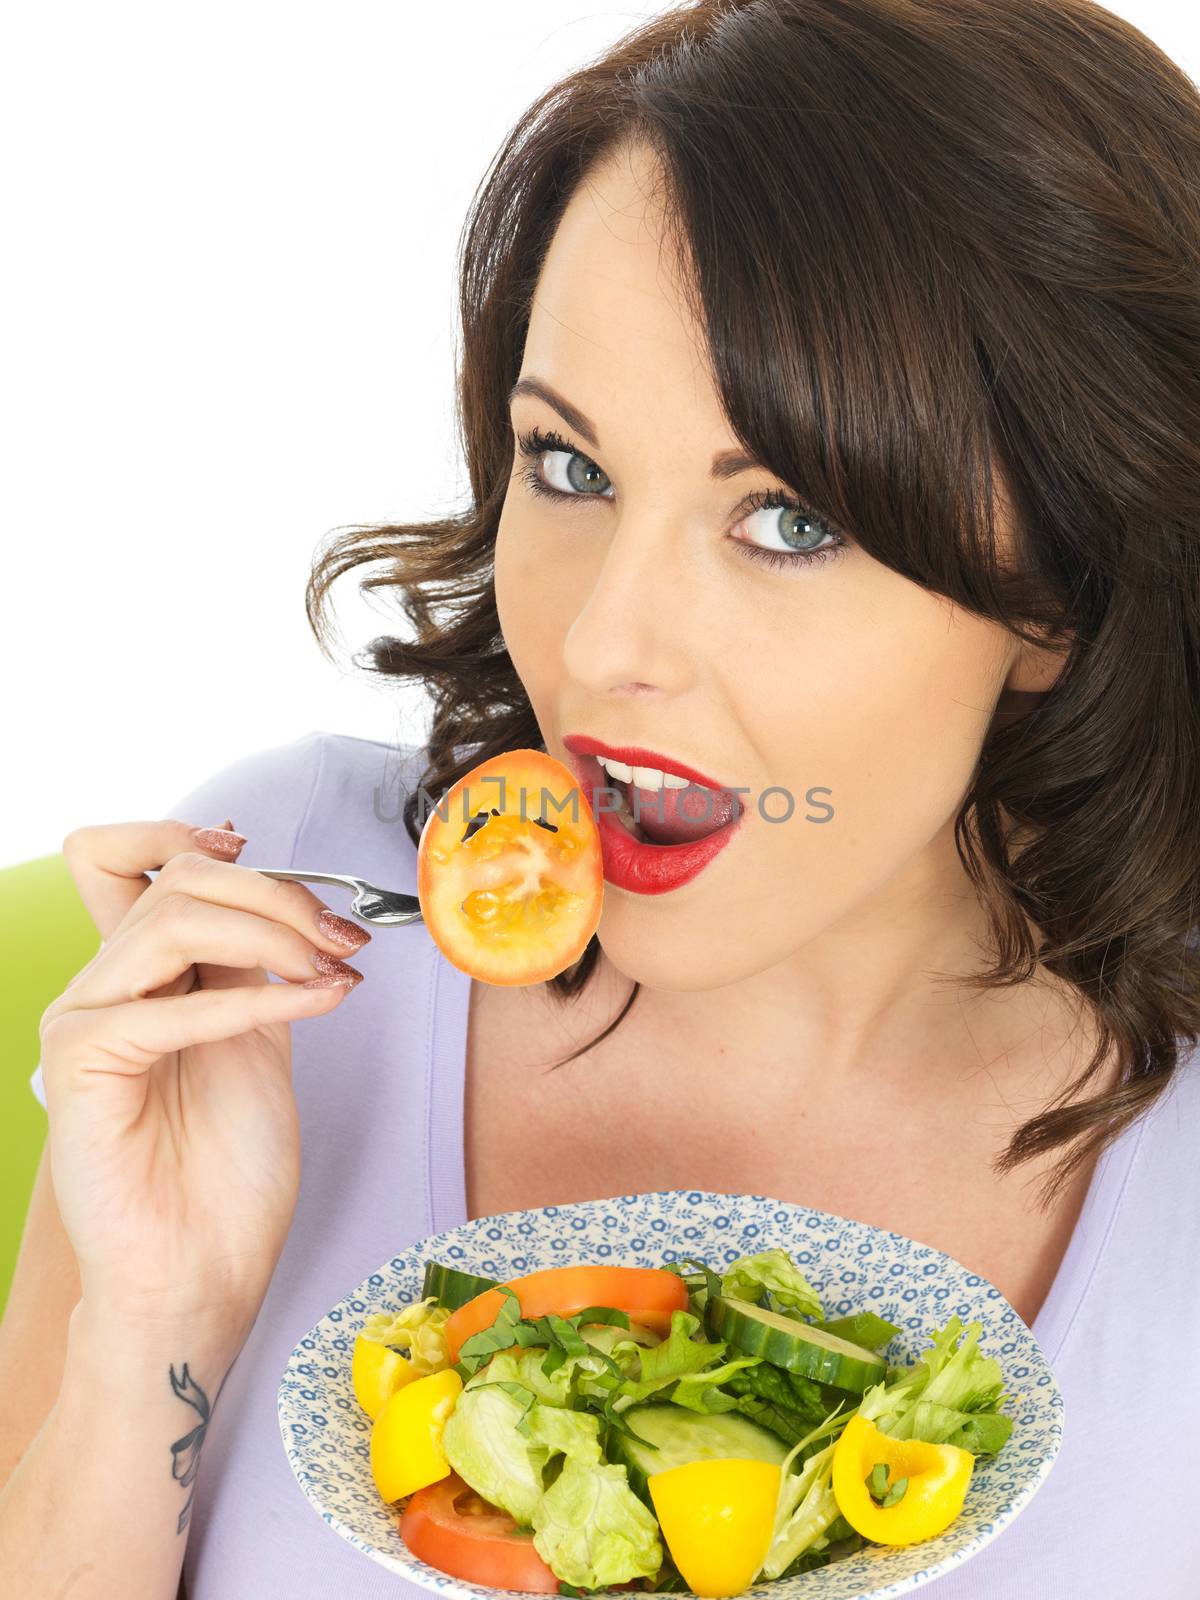 Young Woman Eating a Healthy Mixed Salad by Whiteboxmedia